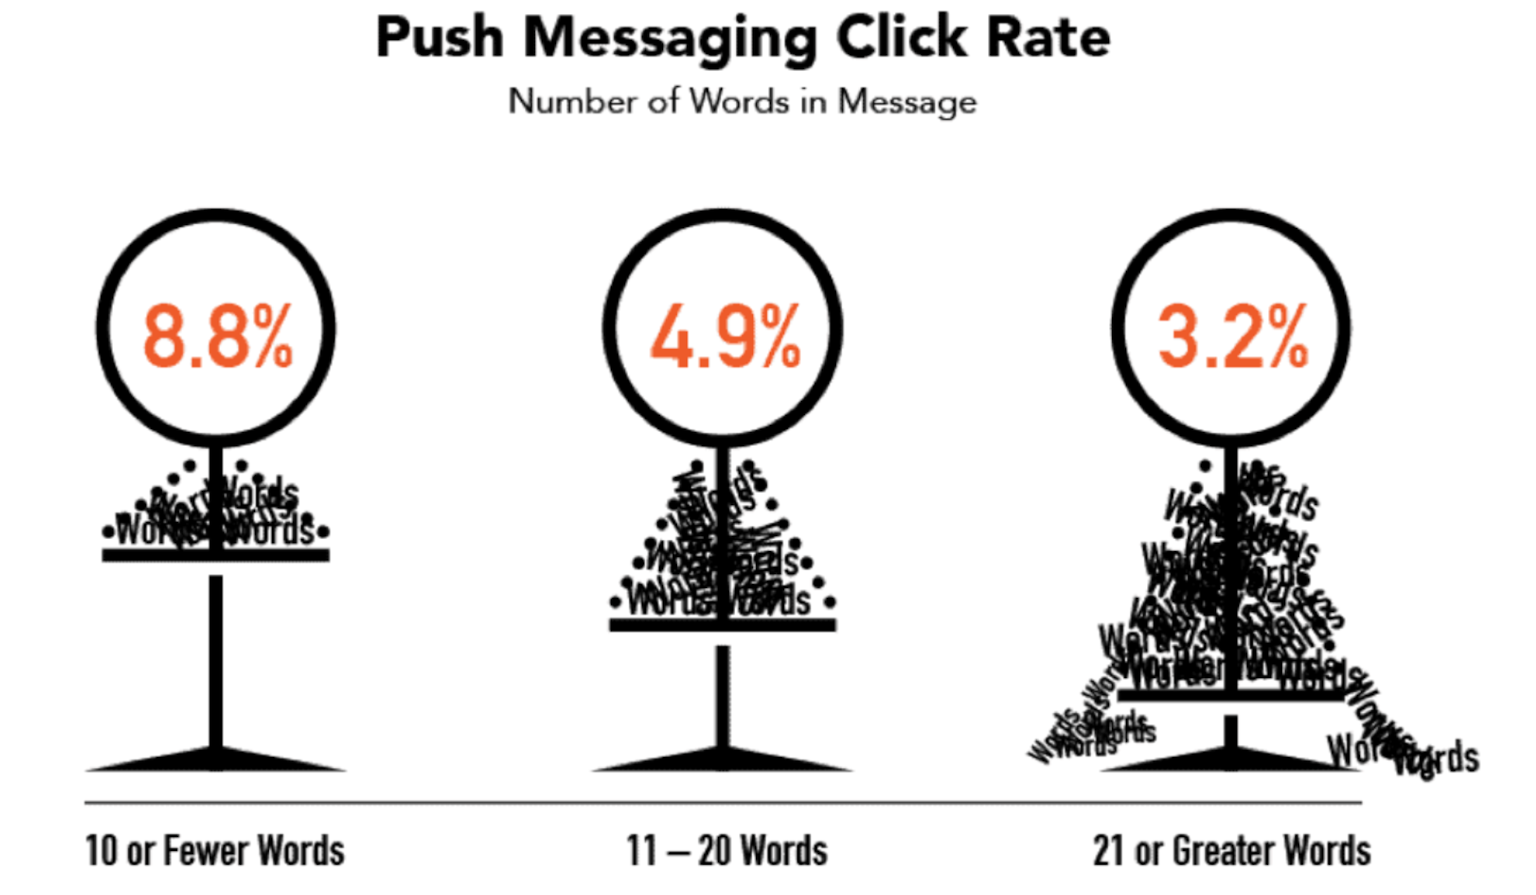 Messages with less than 10 words have higher click rate